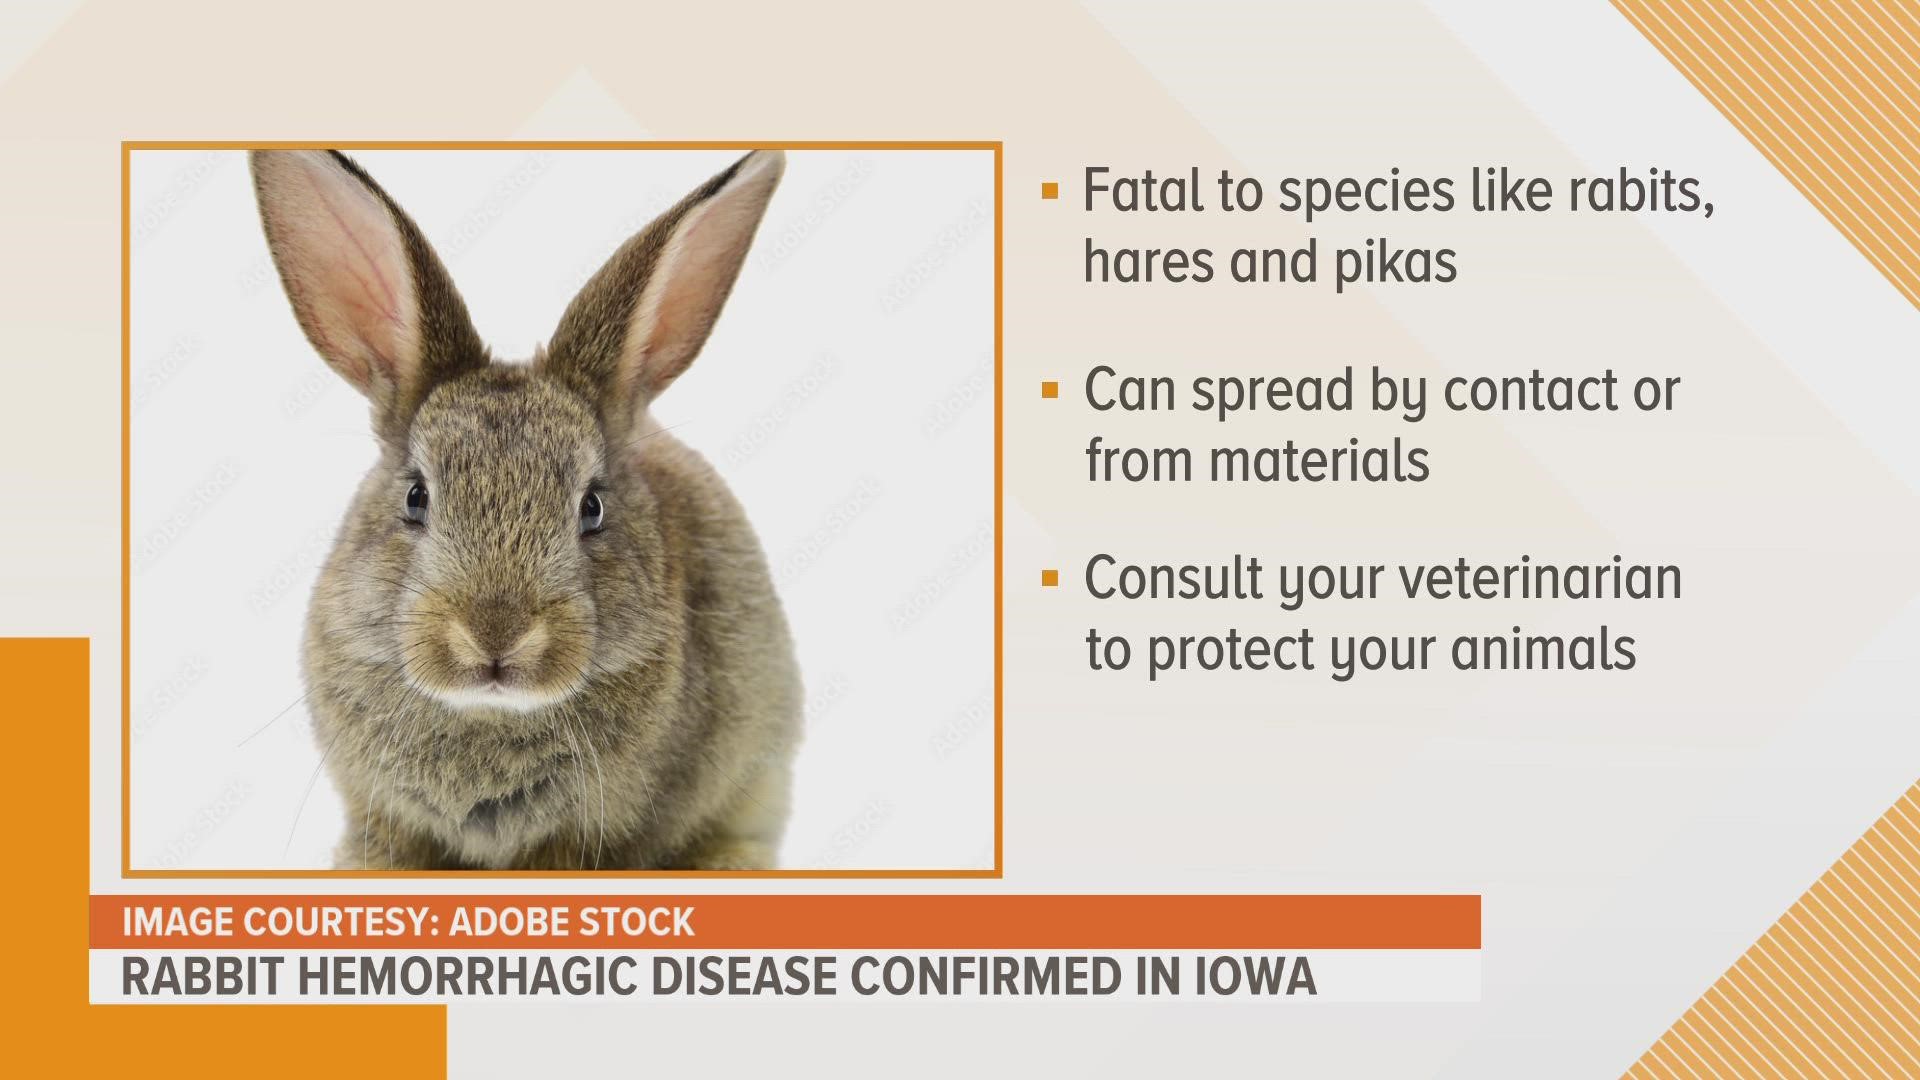 The highly contagious viral disease is deadly to species like rabbits, hares and pikas. It can spread by contact with infected rabbits or contaminated materials.